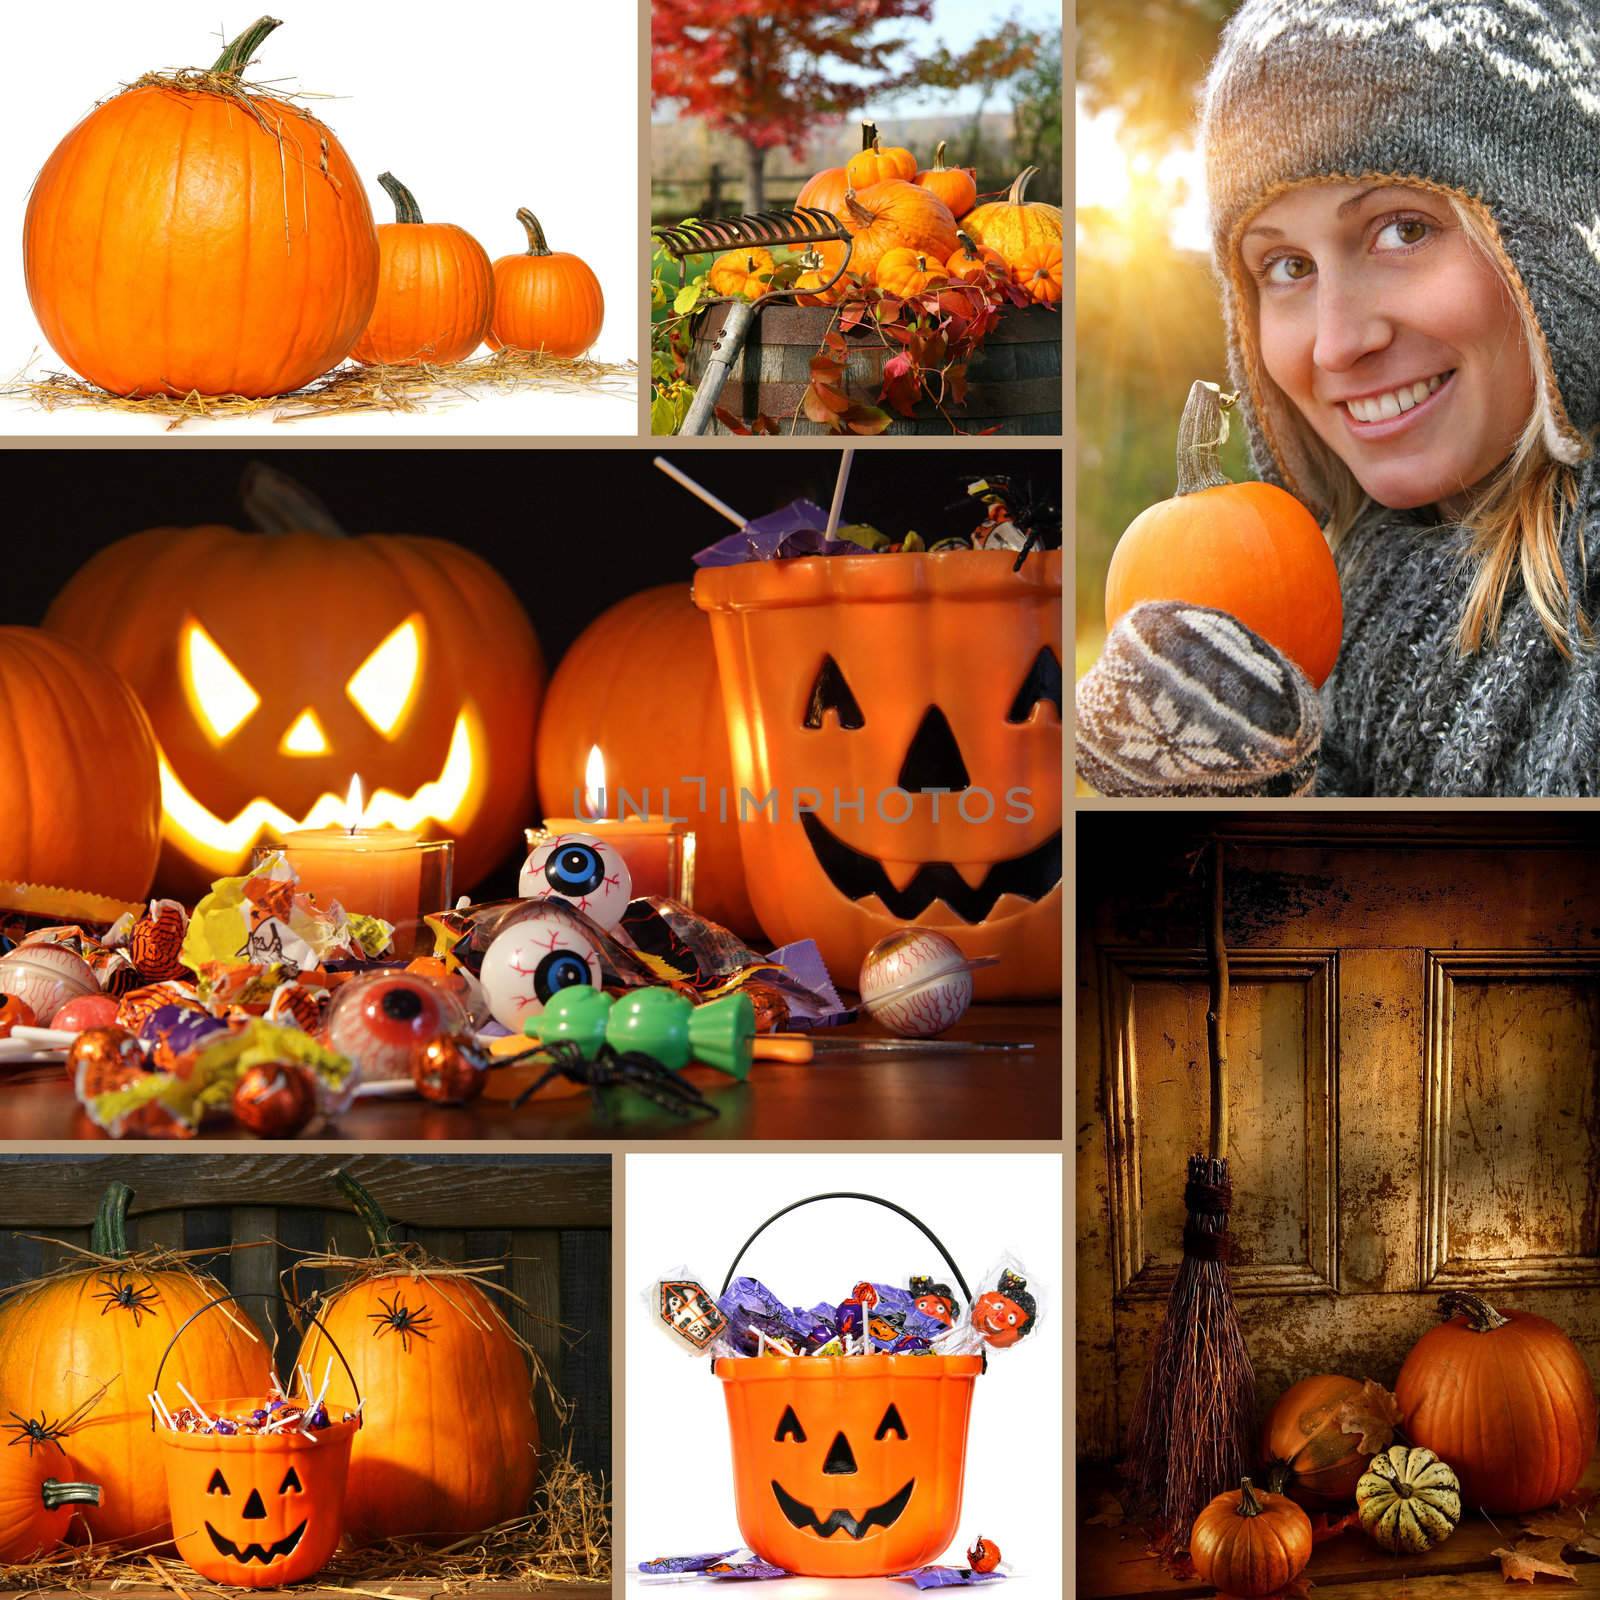 Halloween and autumn collage by Sandralise